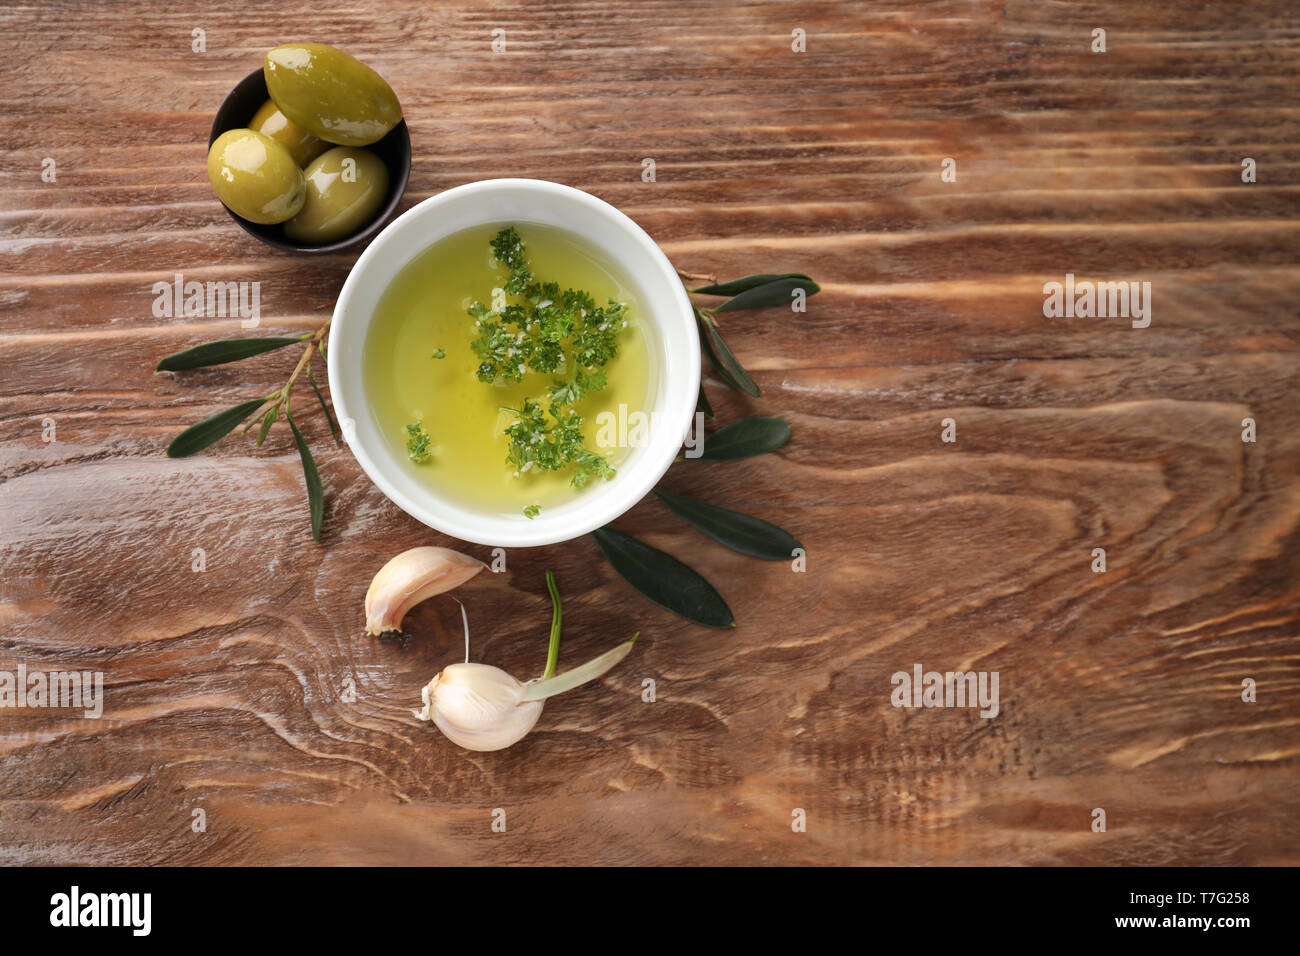 Bowls with oil and olives on wooden table Stock Photo